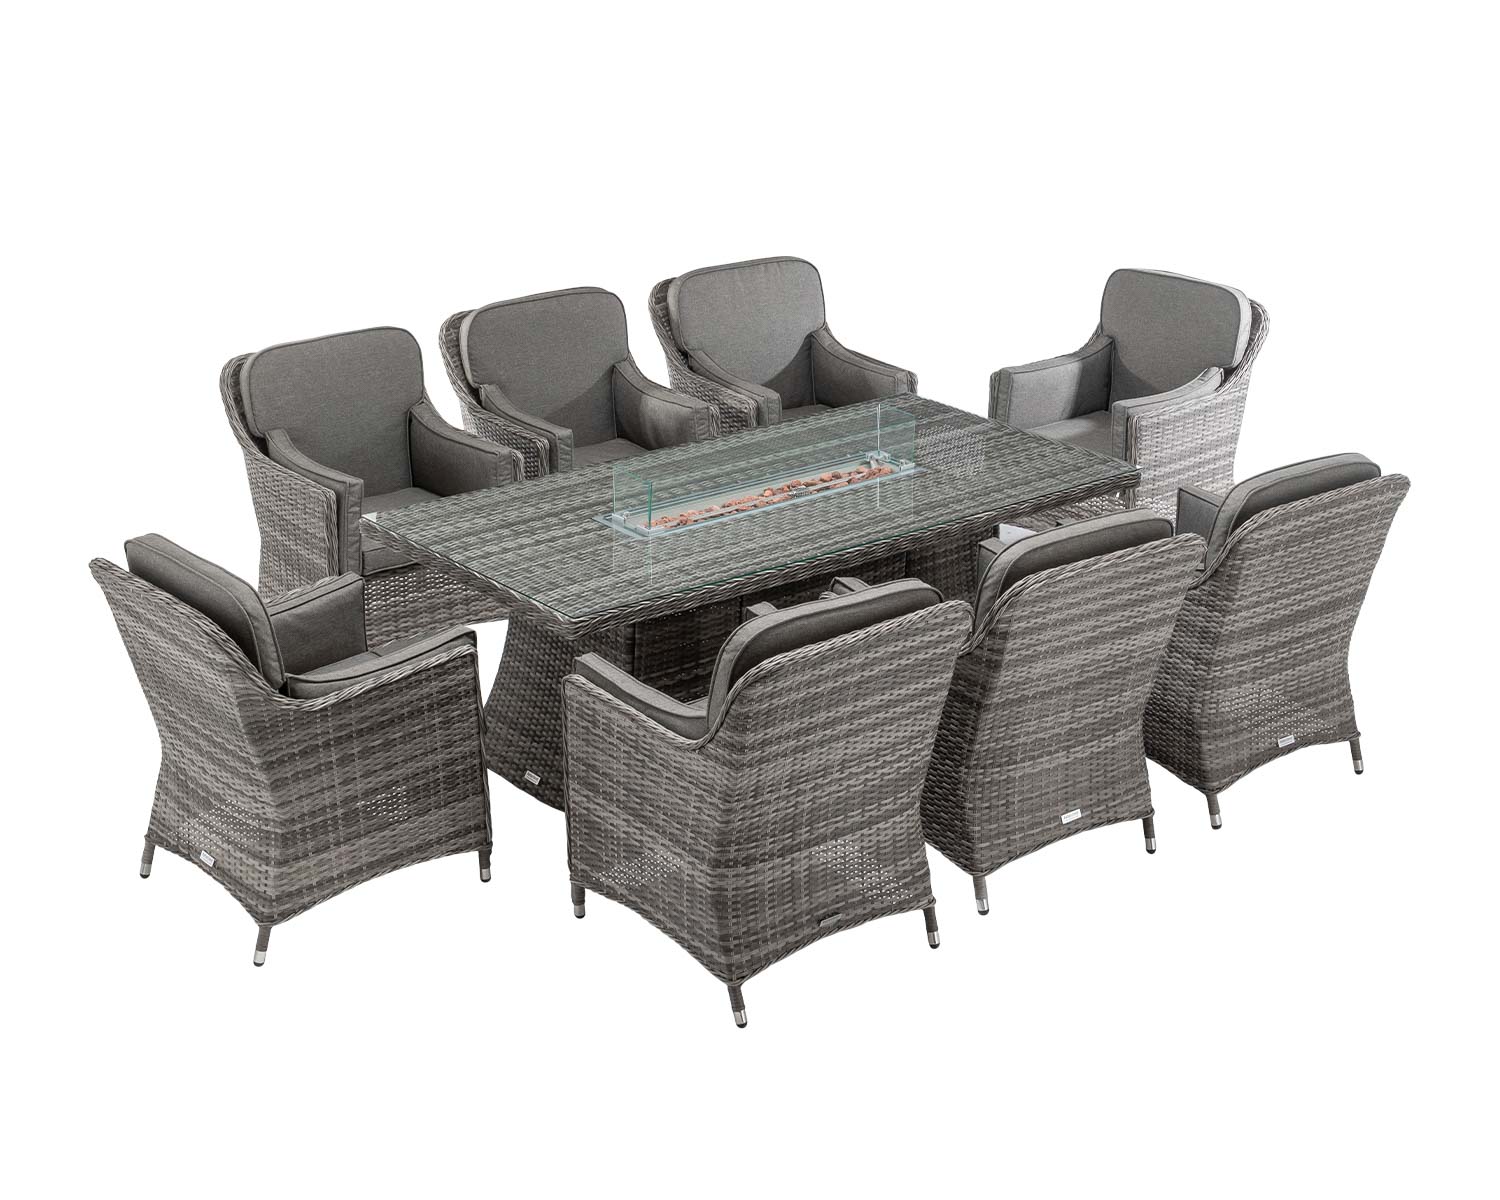 8 Seat Rattan Garden Dining Set With Rectangular Table In Grey With Fire Pit Lyon Rattan Direct